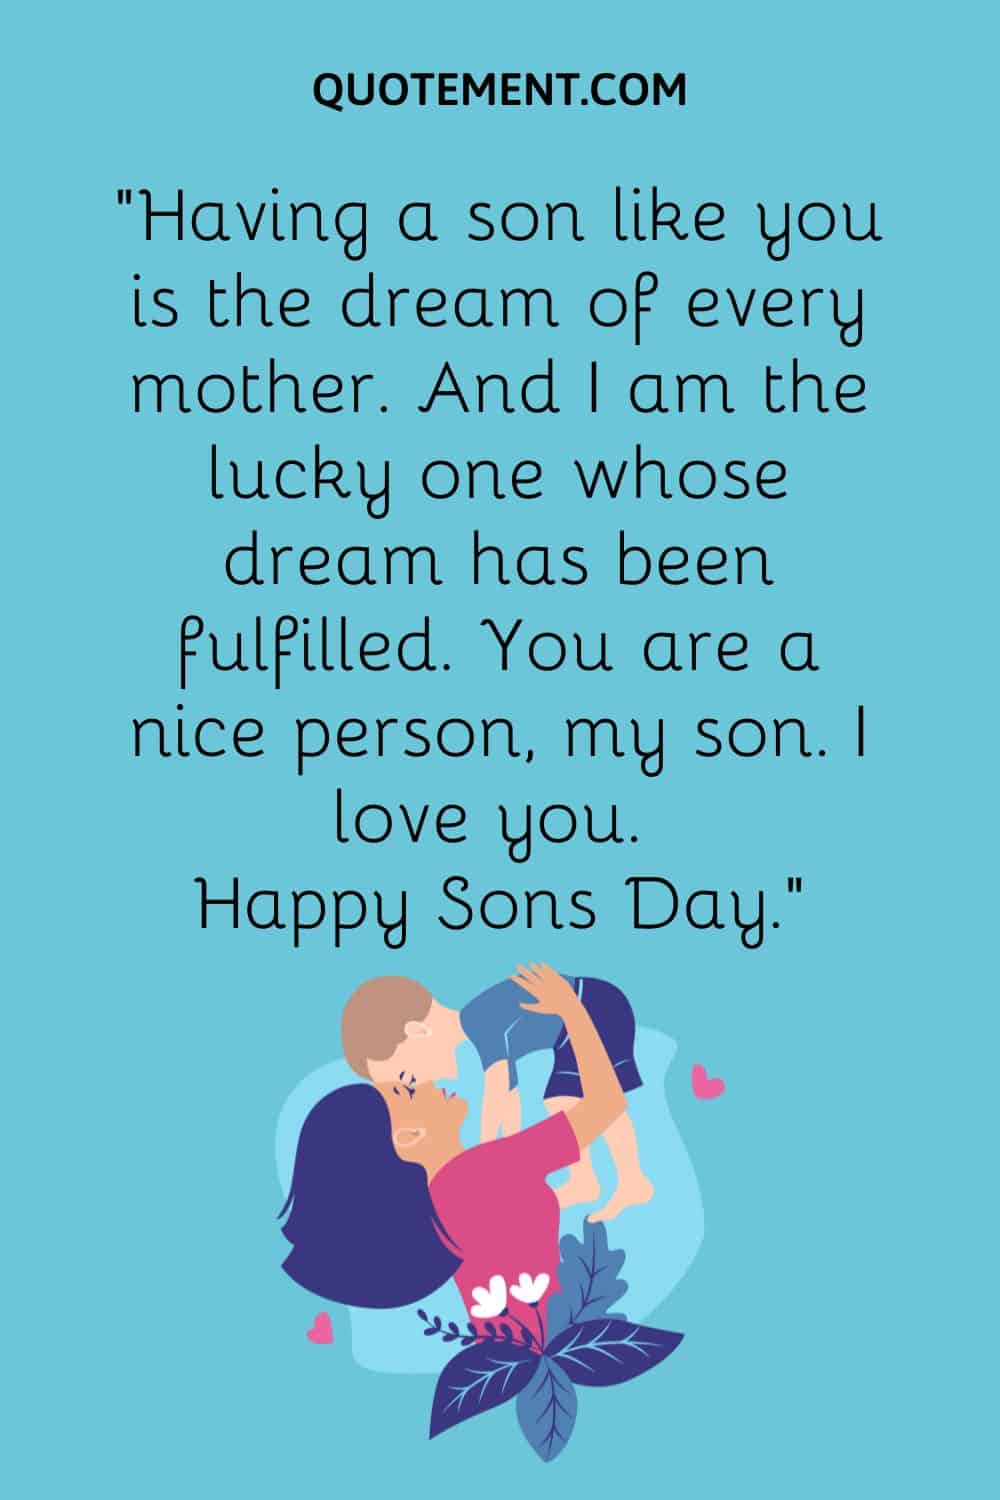 “Having a son like you is the dream of every mother. And I am the lucky one whose dream has been fulfilled. You are a nice person, my son. I love you. Happy Sons Day.”